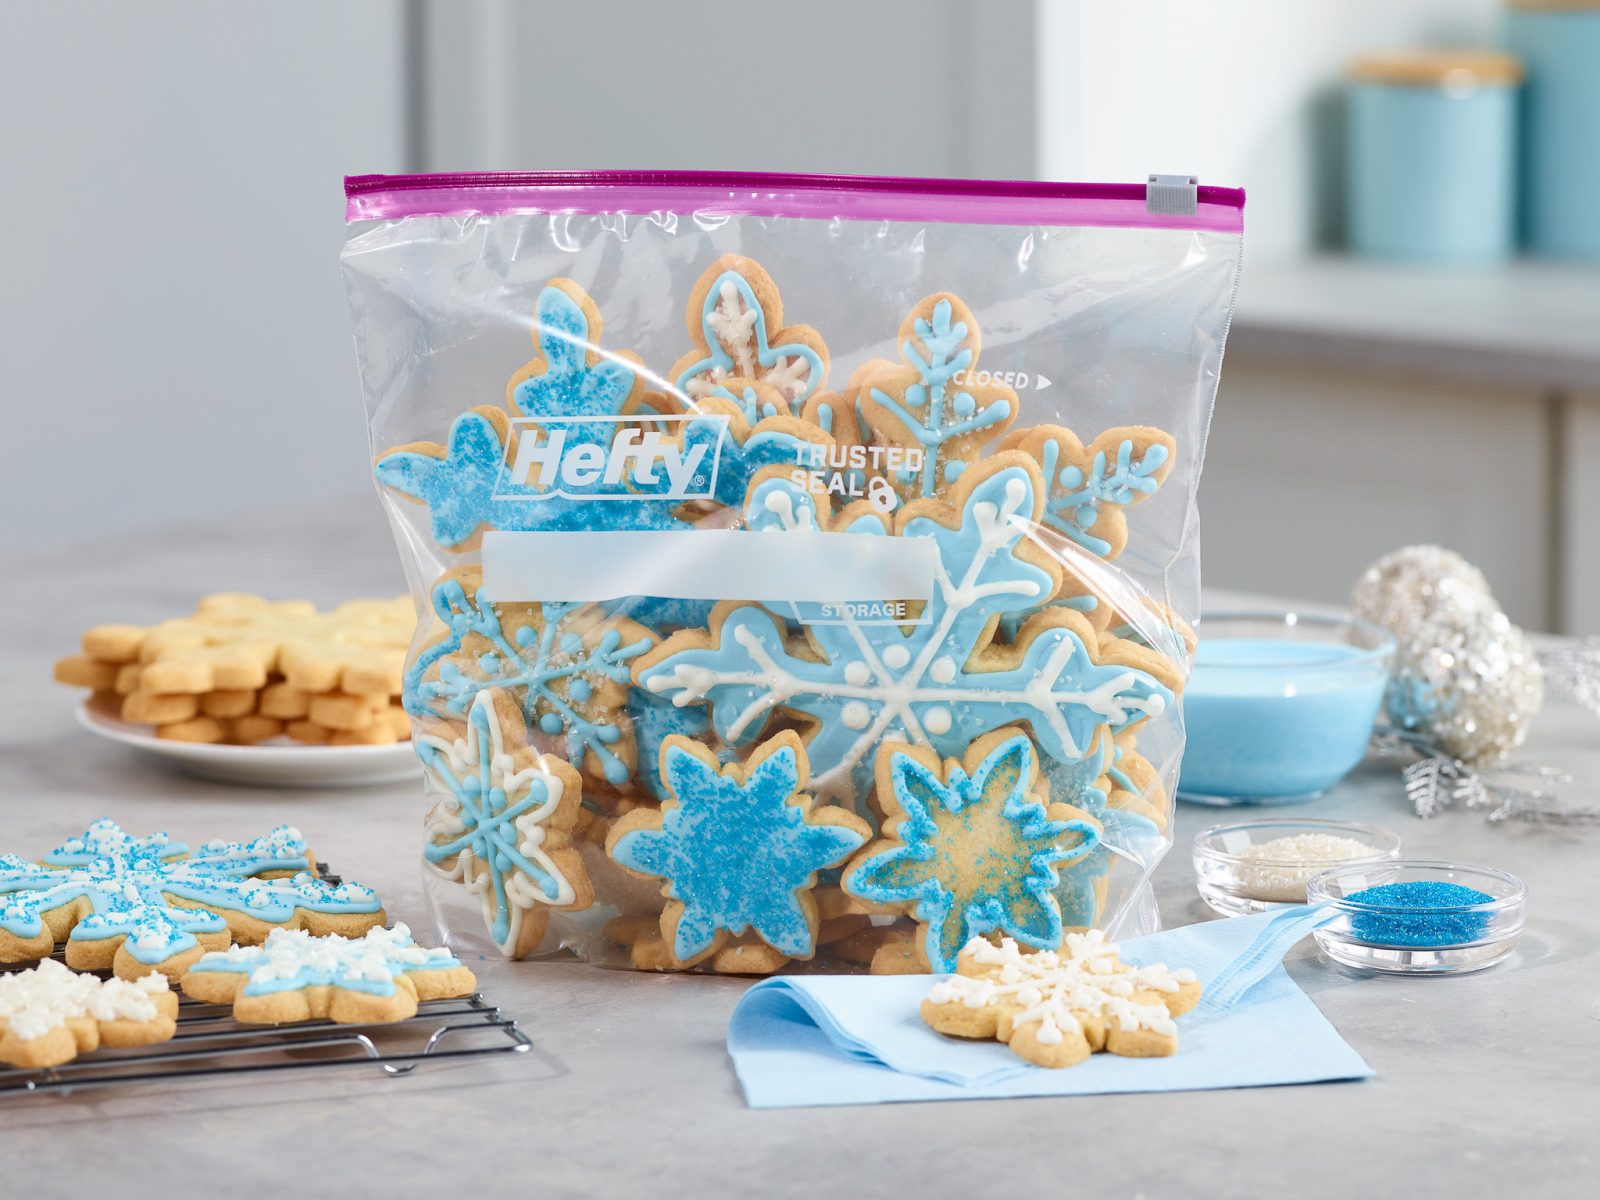 Hefty® Slider Bags Are Perfect For Holiday Food Prep & Storage – Save $2 NOW At Publix